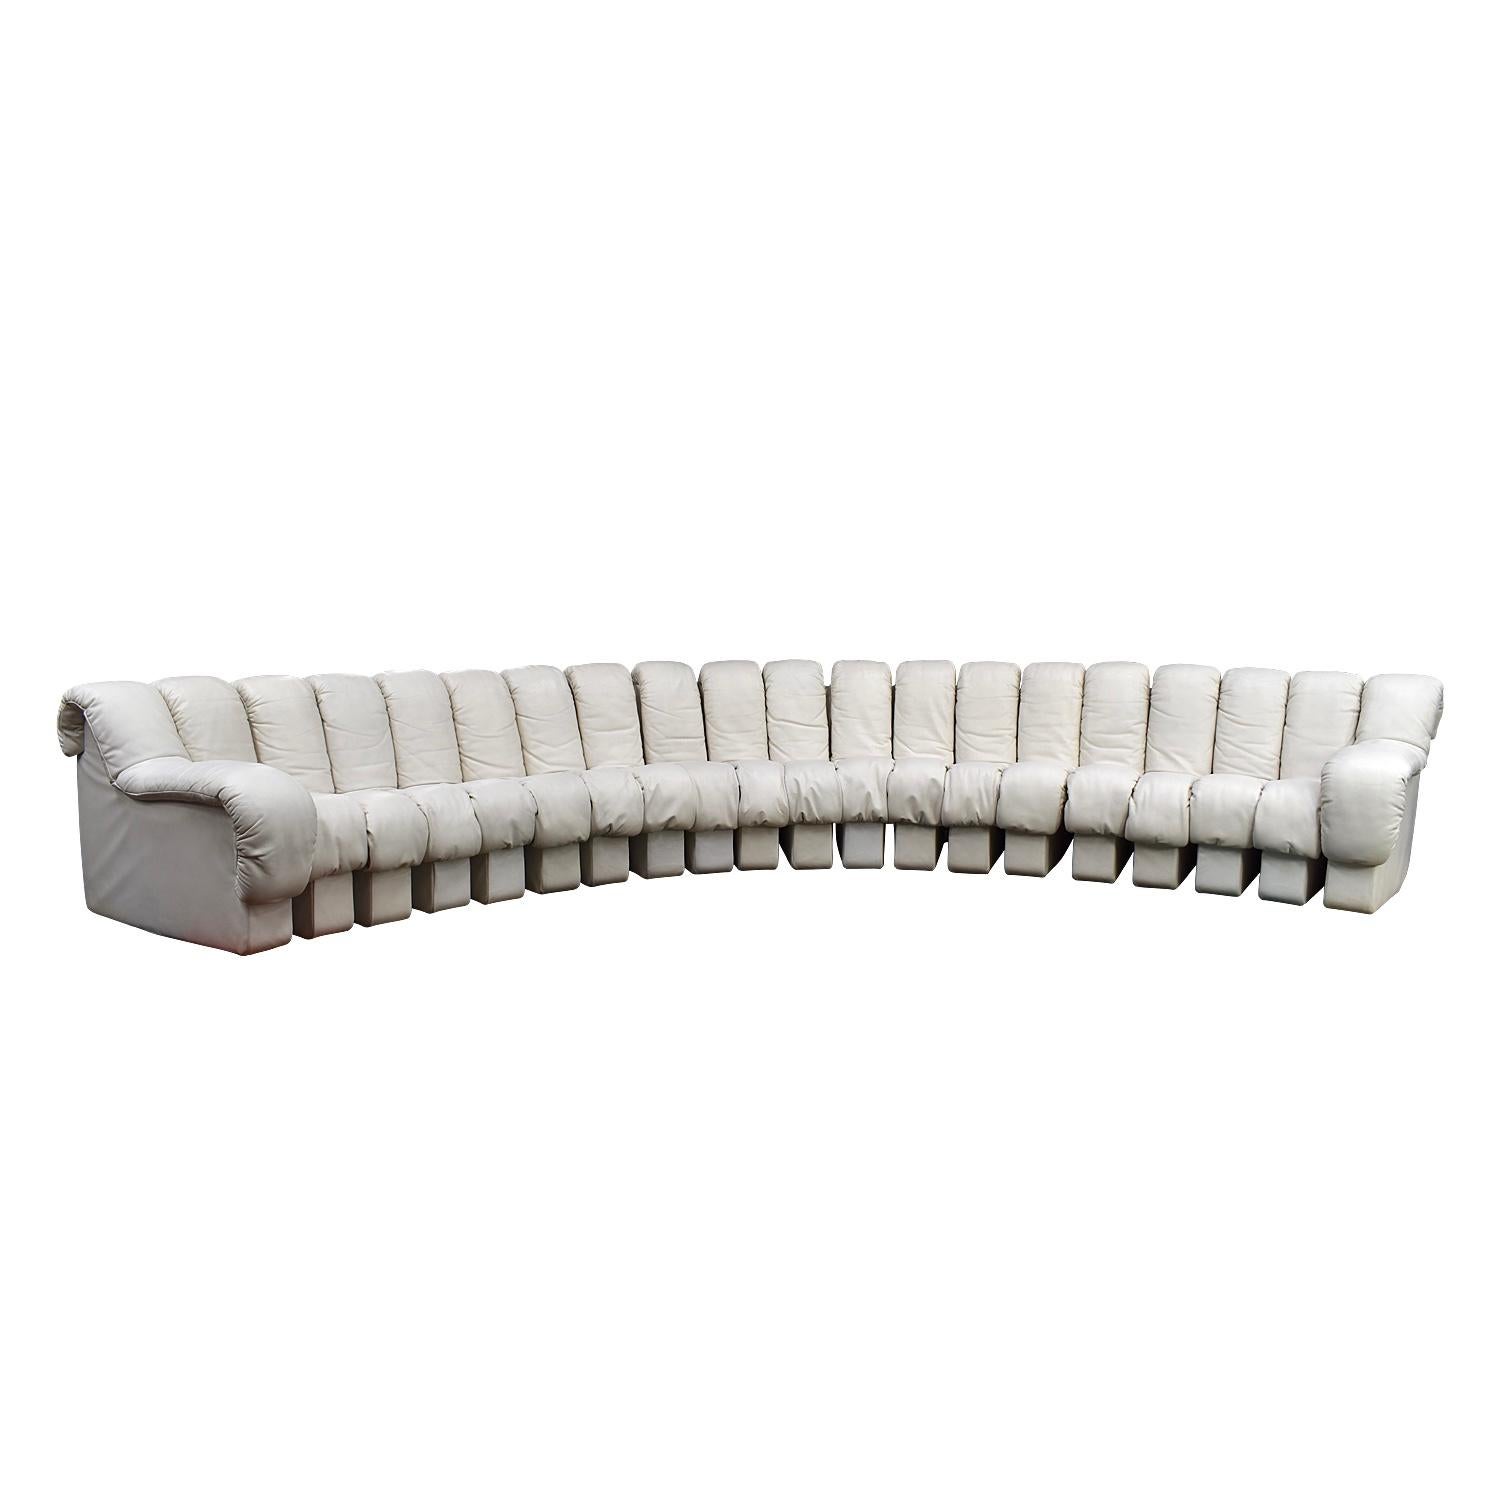 Mid-Century Modern 20-Piece De Sede DS600 'Snake' Non-Stop Sectional Sofa in Crème White Leather